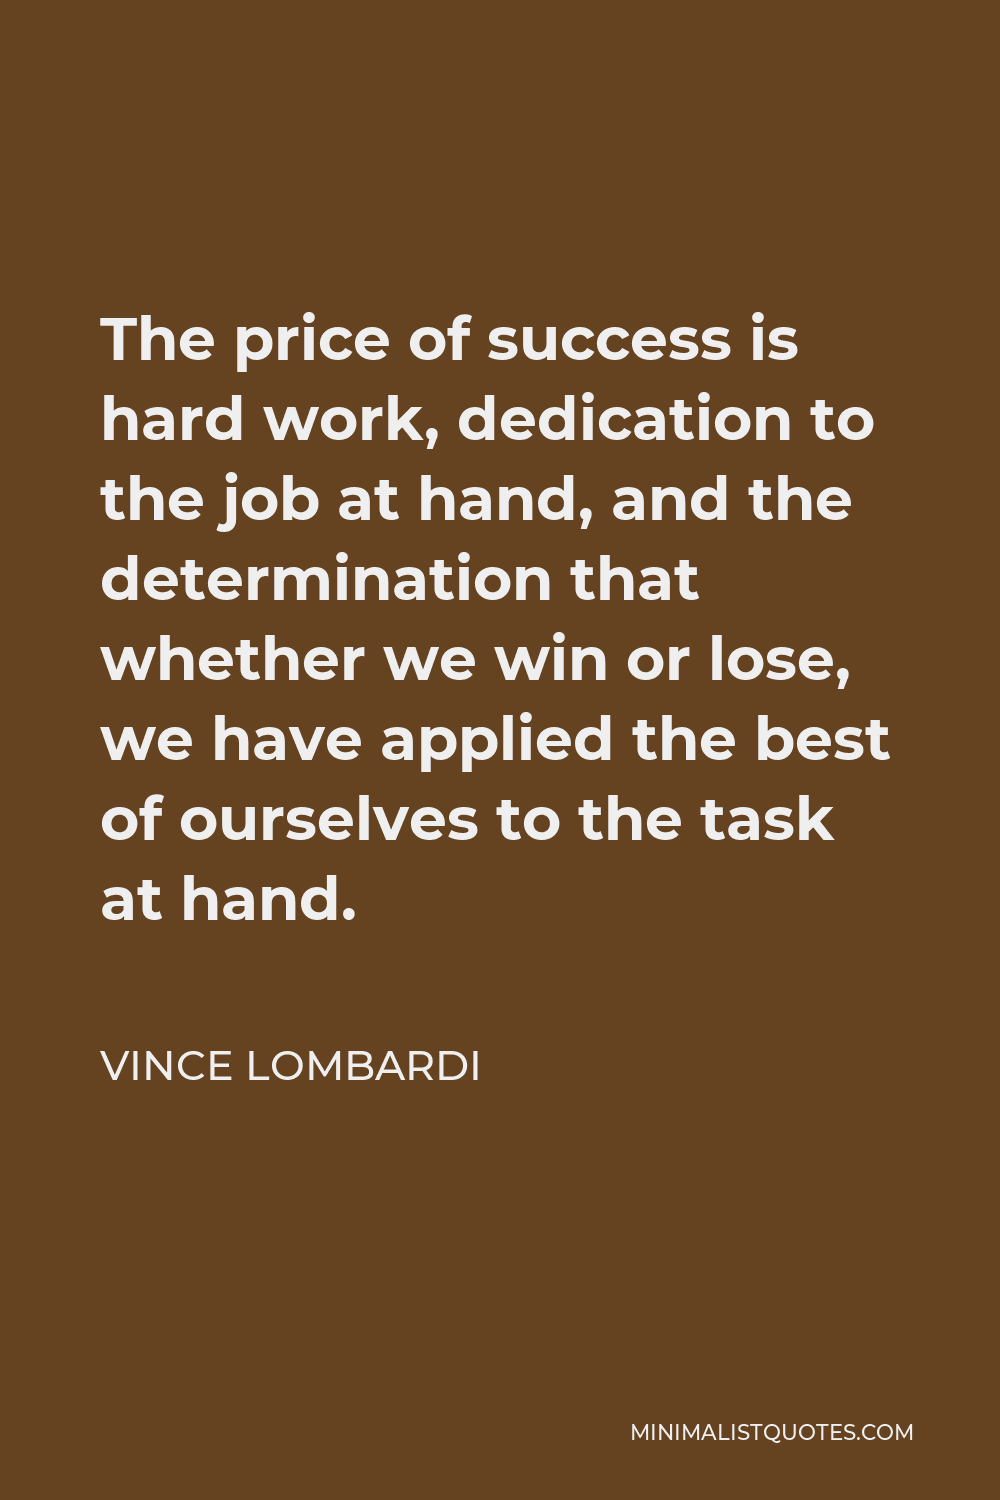 Vince Lombardi Quote - The price of success is hard work, dedication to the job at hand.